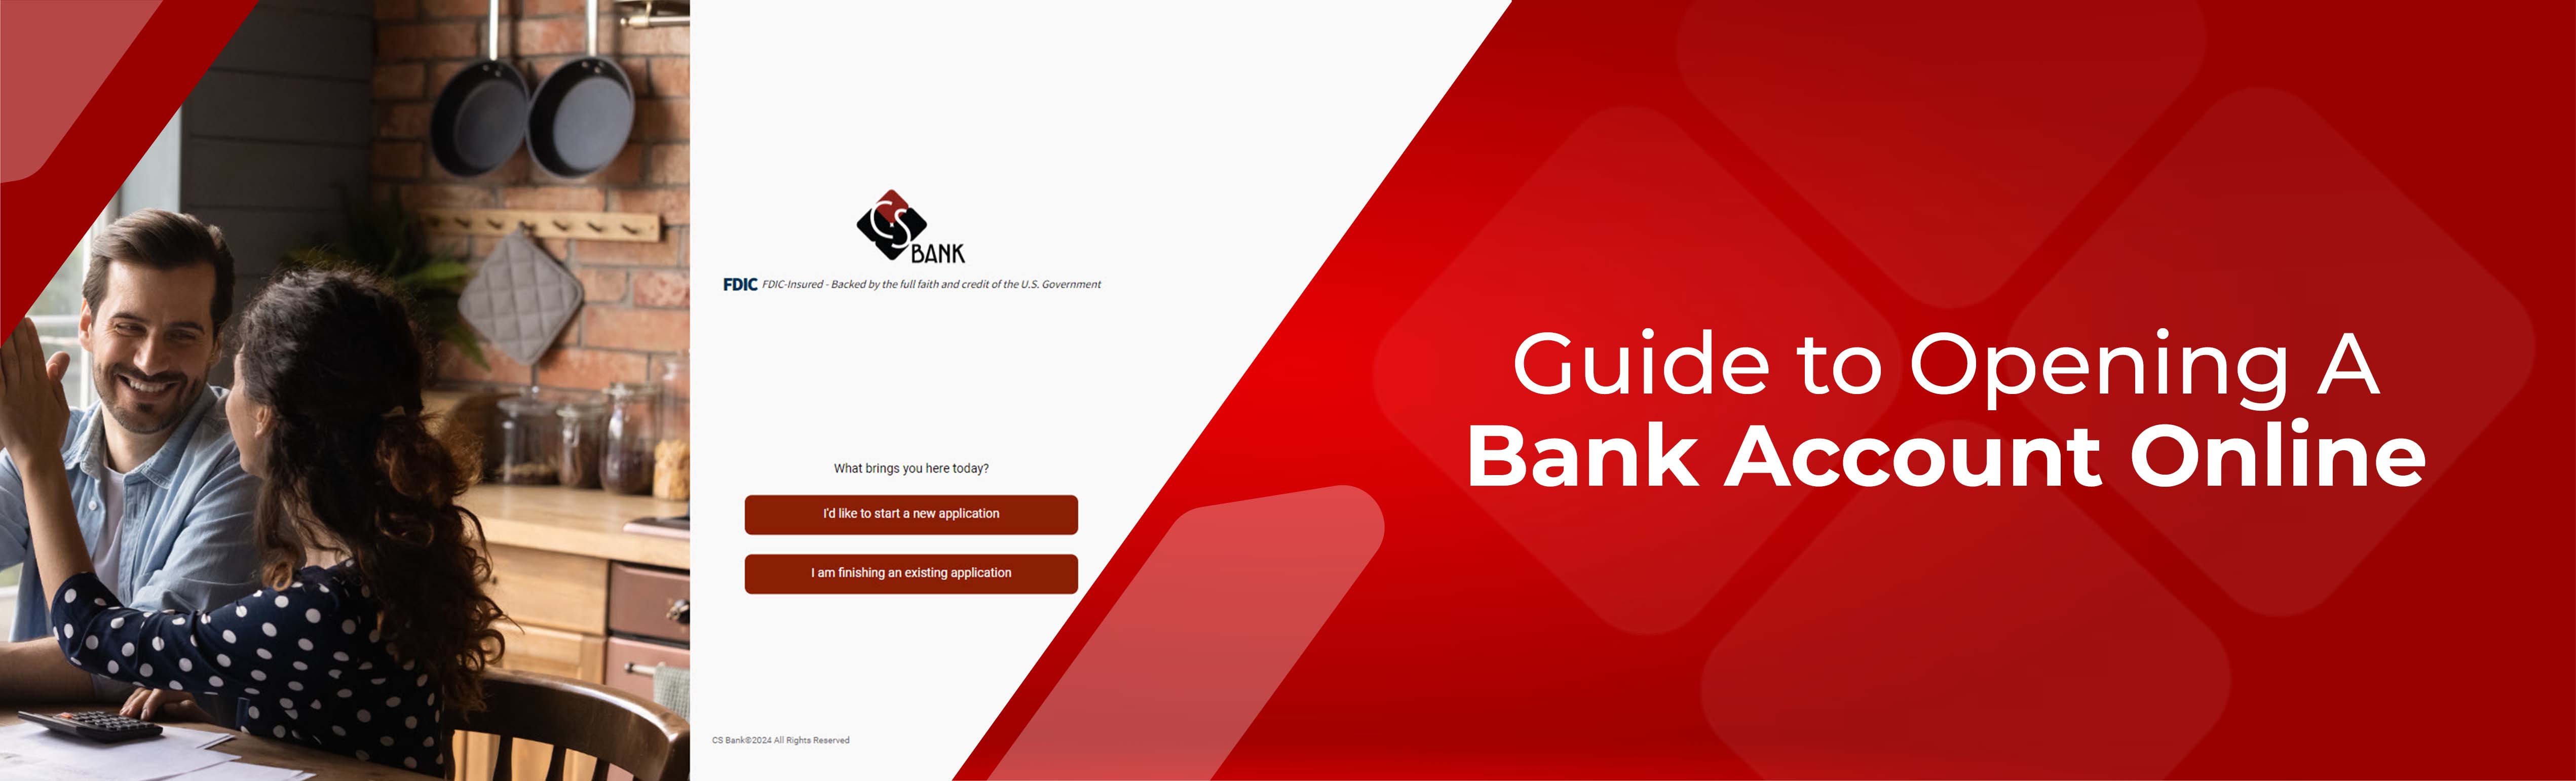 Guide to Opening A Bank Account Online